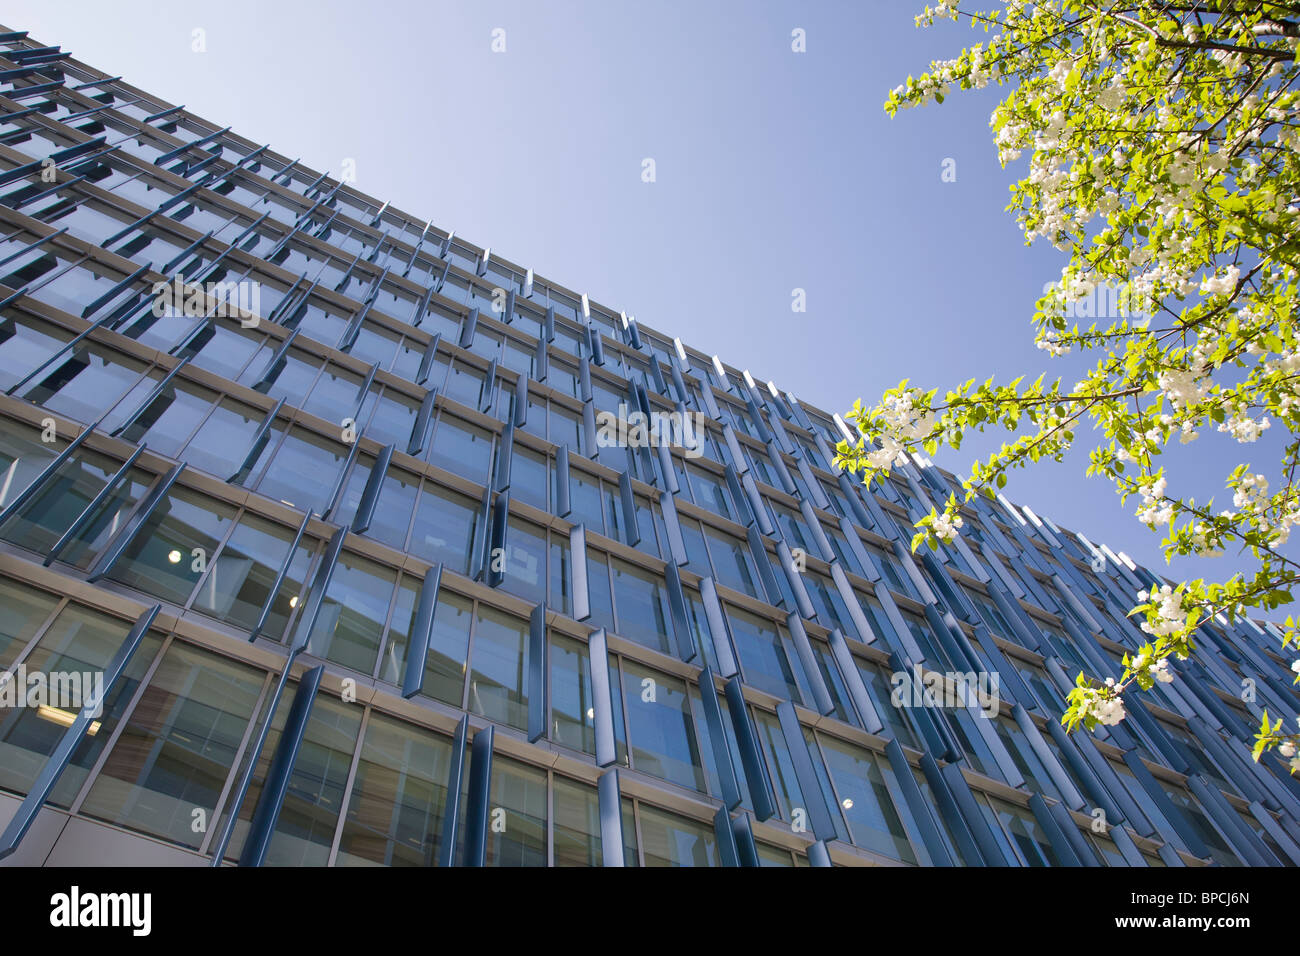 Interesting facade of a London office building. Stock Photo